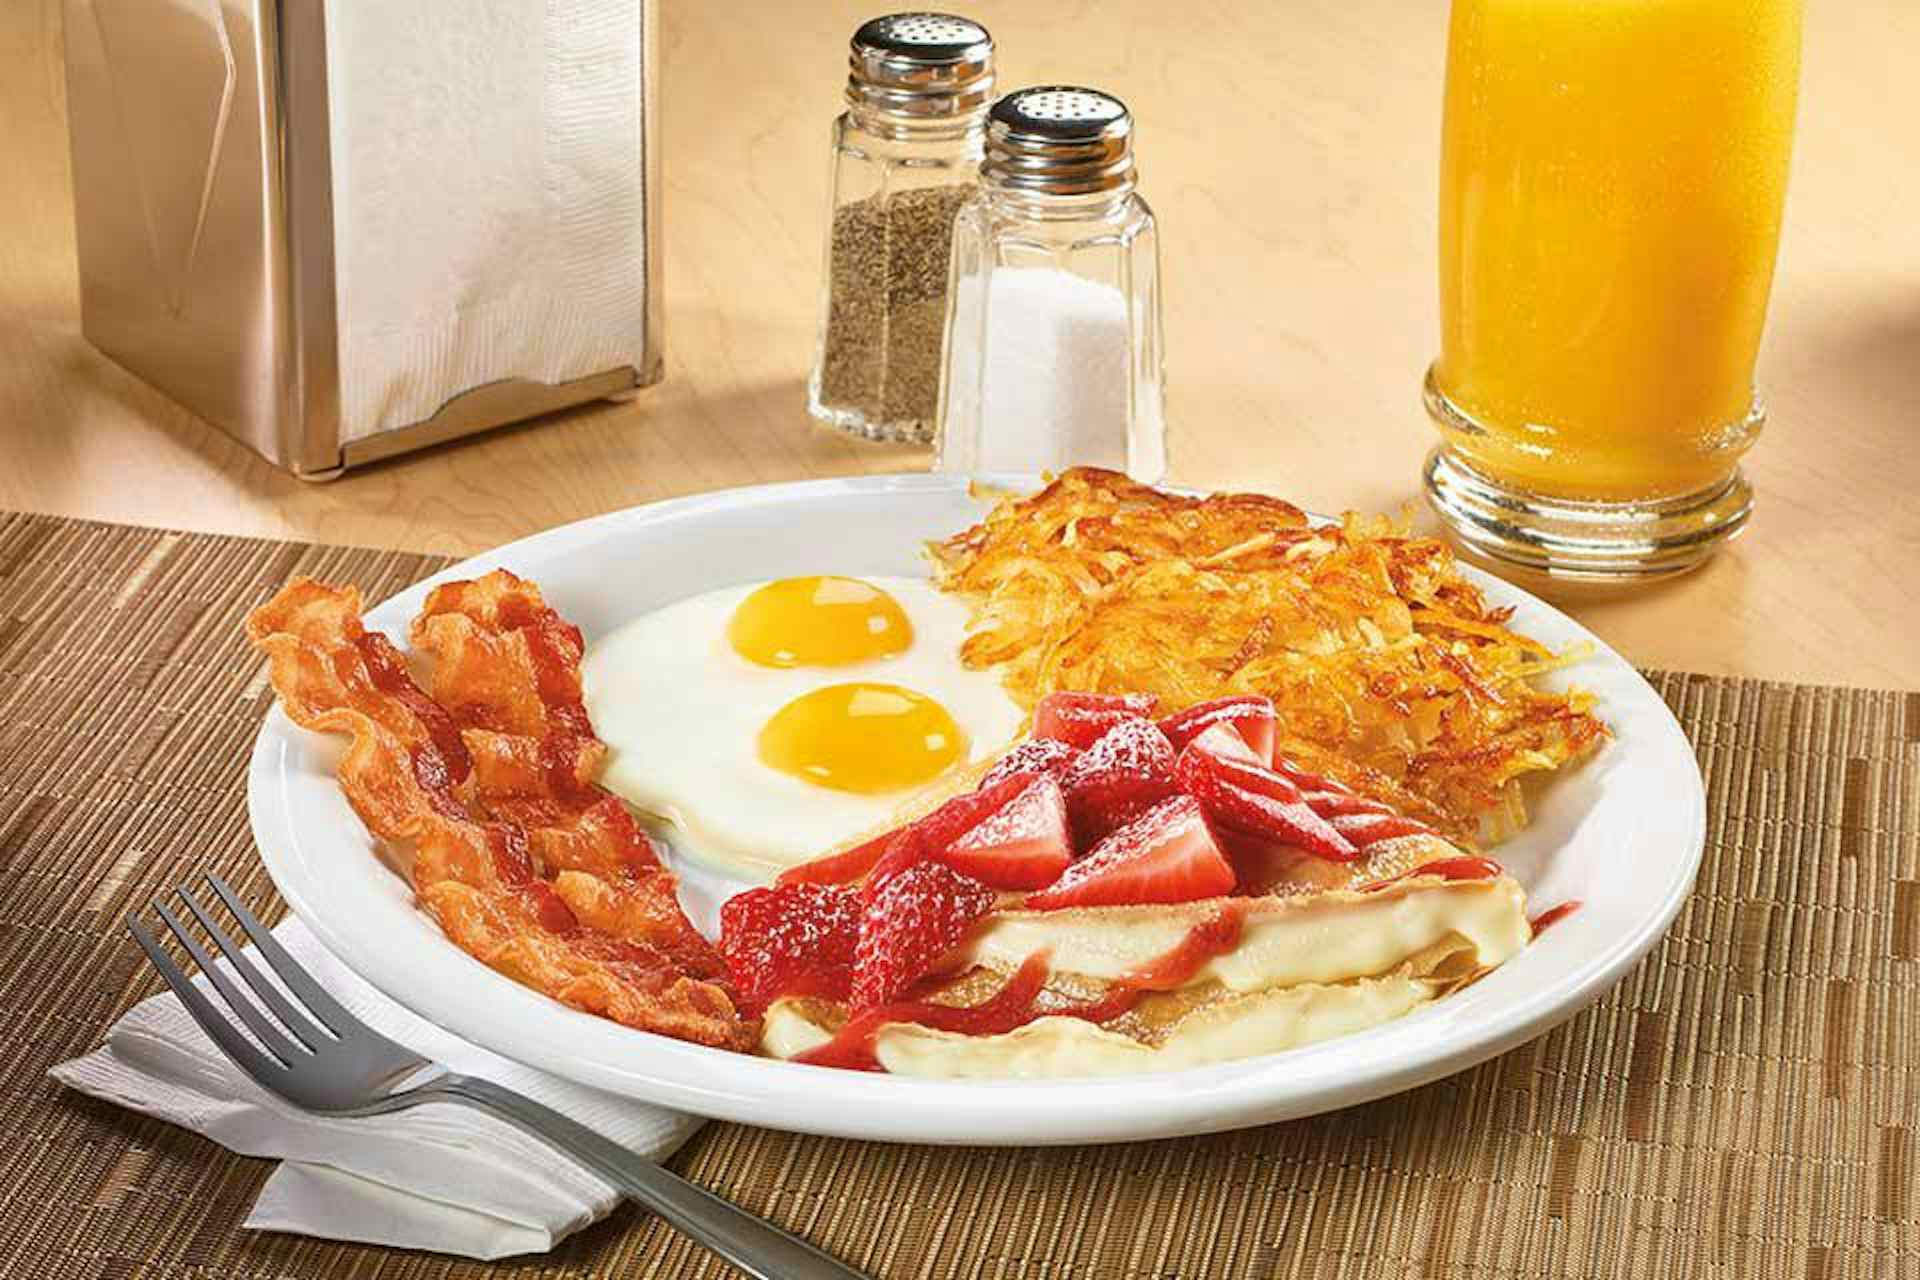 Plate of eggs, hashbrowns, pancakes topped with fresh strawberries, and crispy golden hashbrowns, courtesy of Denny's of Idaho Falls in the Yellowstone Teton Territory. 